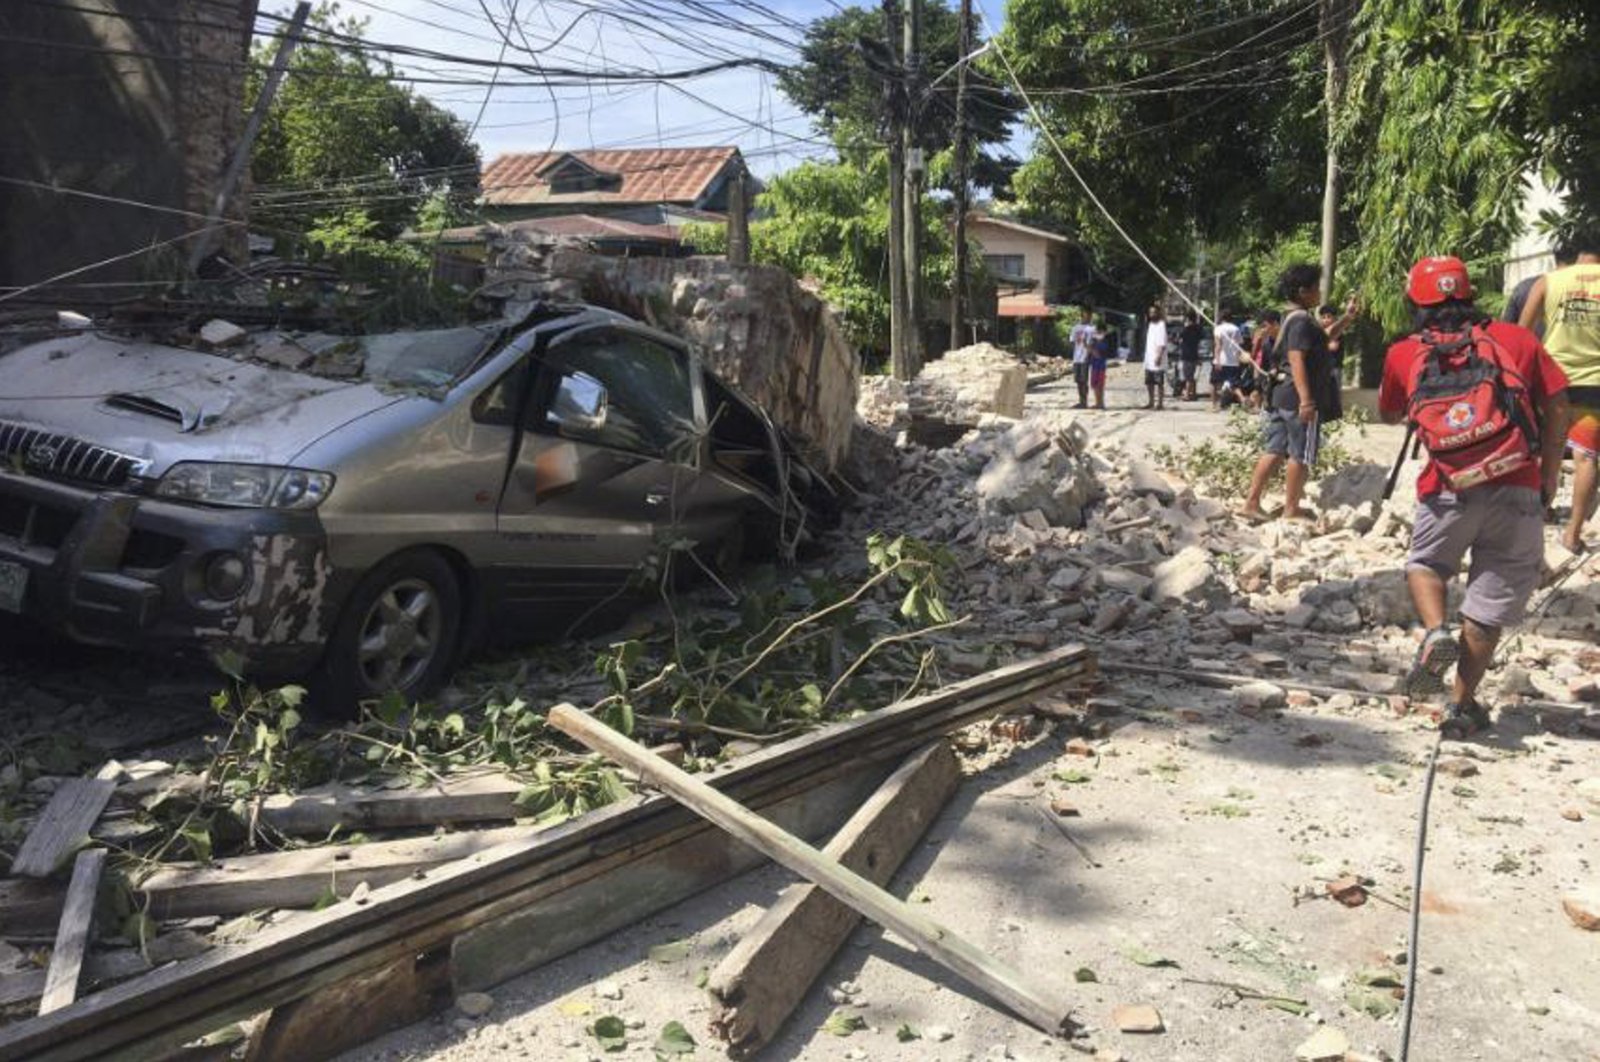 A vehicle is damaged by a collapsing wall after a strong earthquake hit Ilocos Sur province, Philippines, July 27, 2022. (Philippine Red Cross via AP)